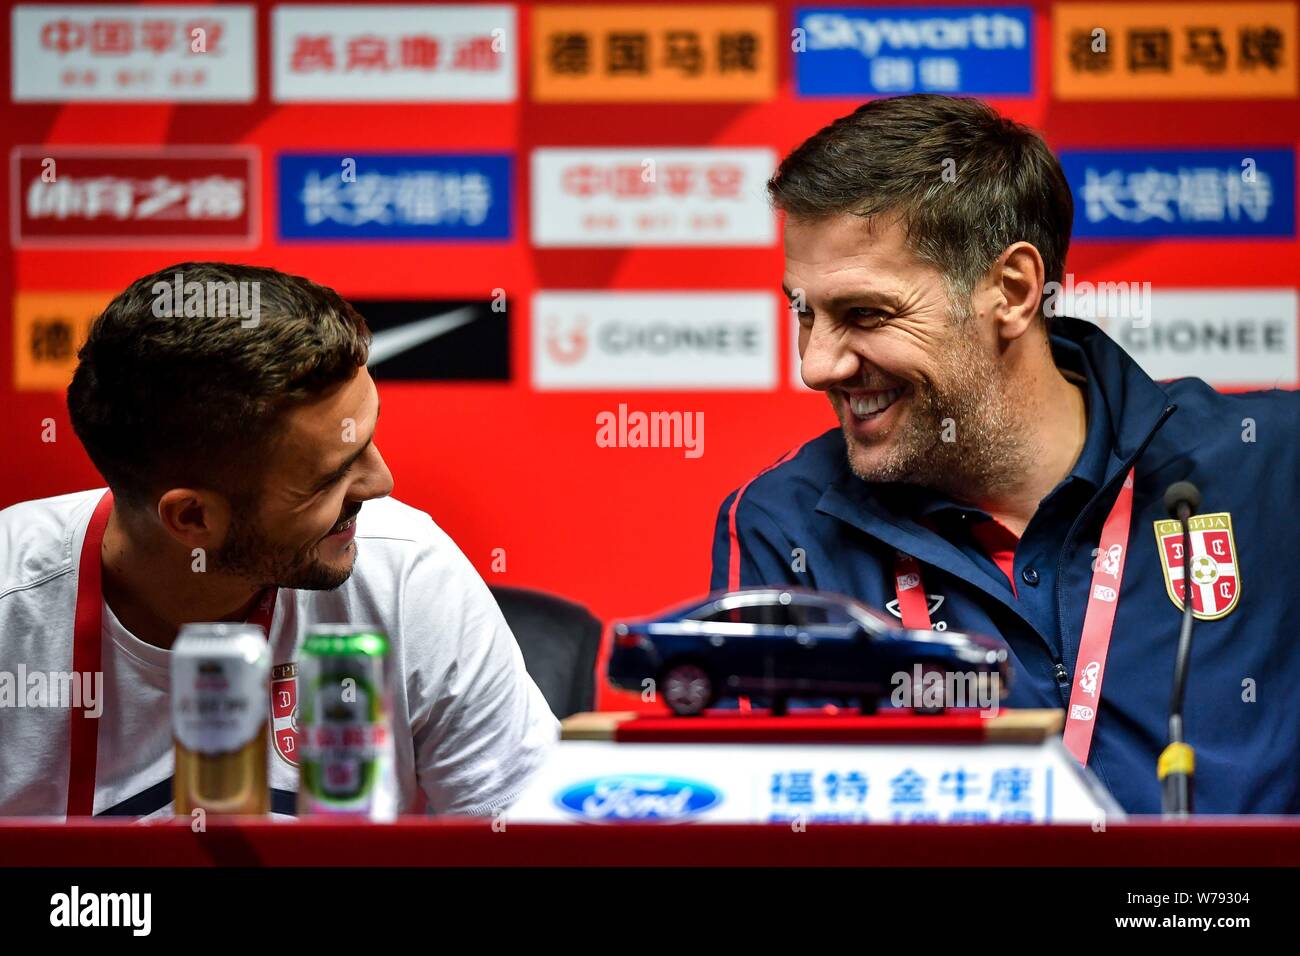 Serbian football player Dusan Tadic, left, and head coach Mladen Krstajic of Serbia attend a press conference for the 2017 CFA Team China Internationa Stock Photo